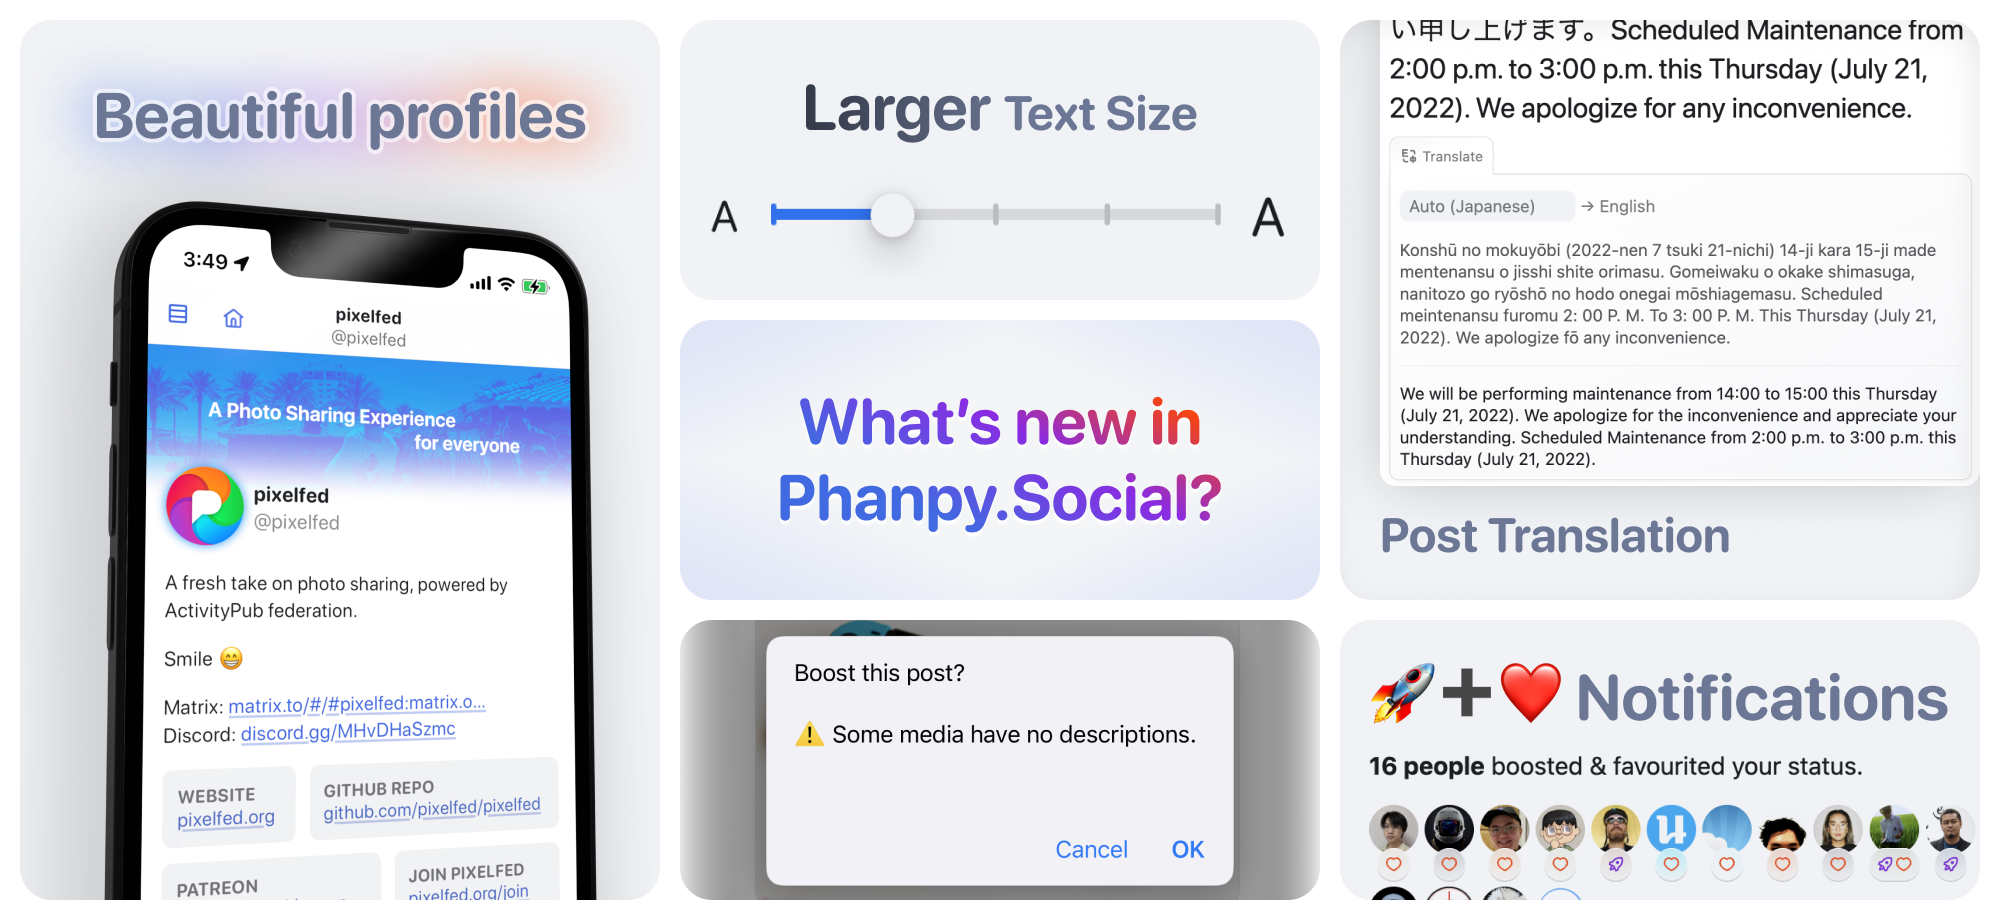 "What's new in Phanpy.Social" features collage